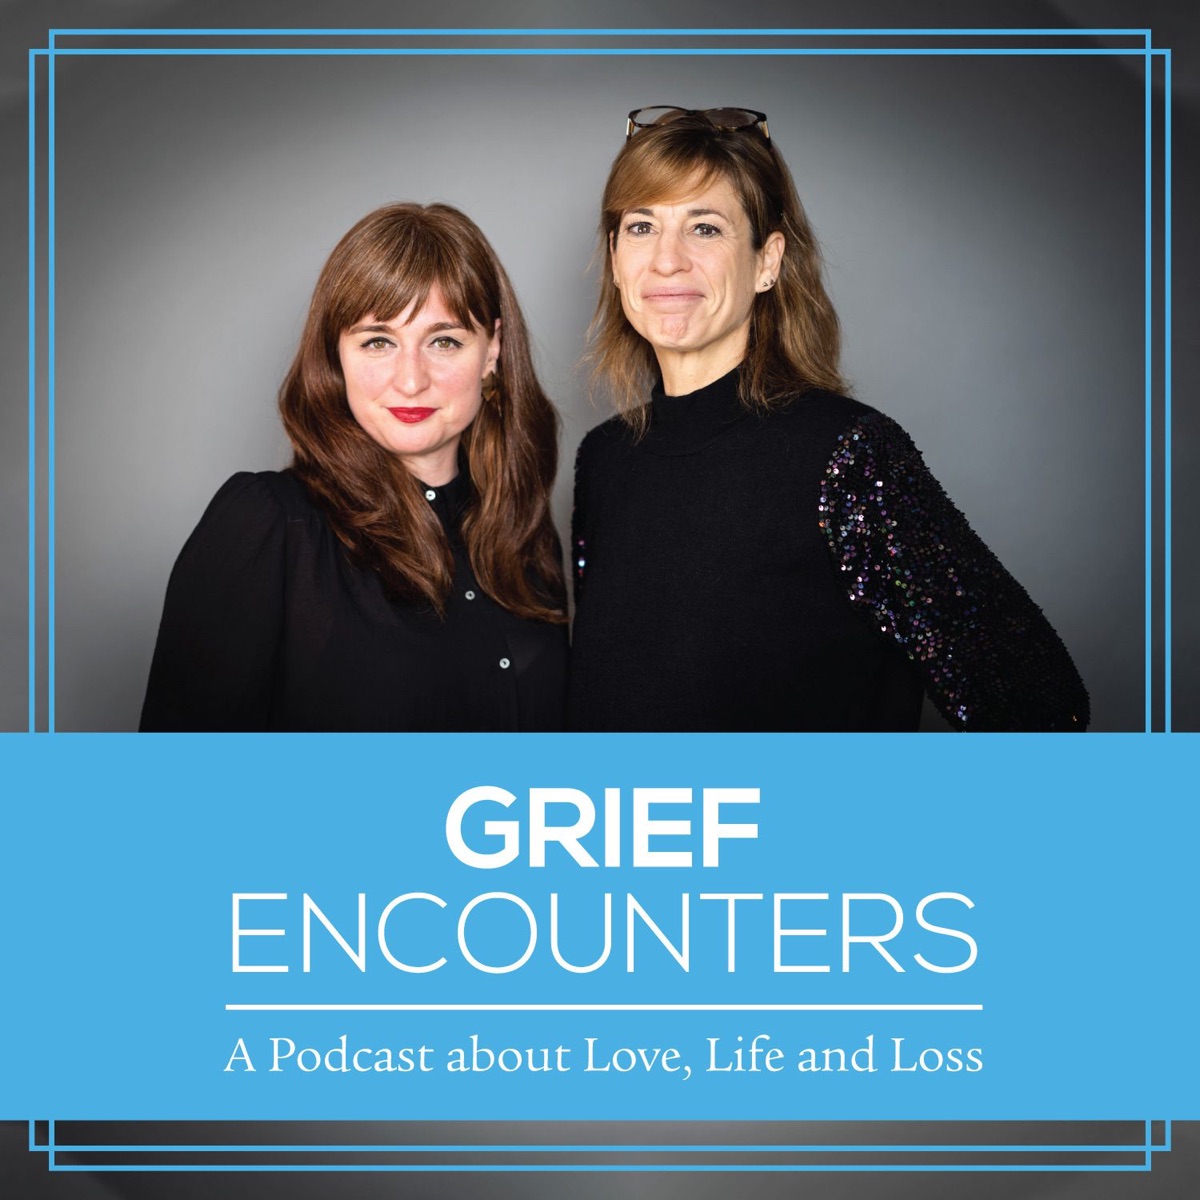 Image of presenters of the grief encounters podcast. two white women